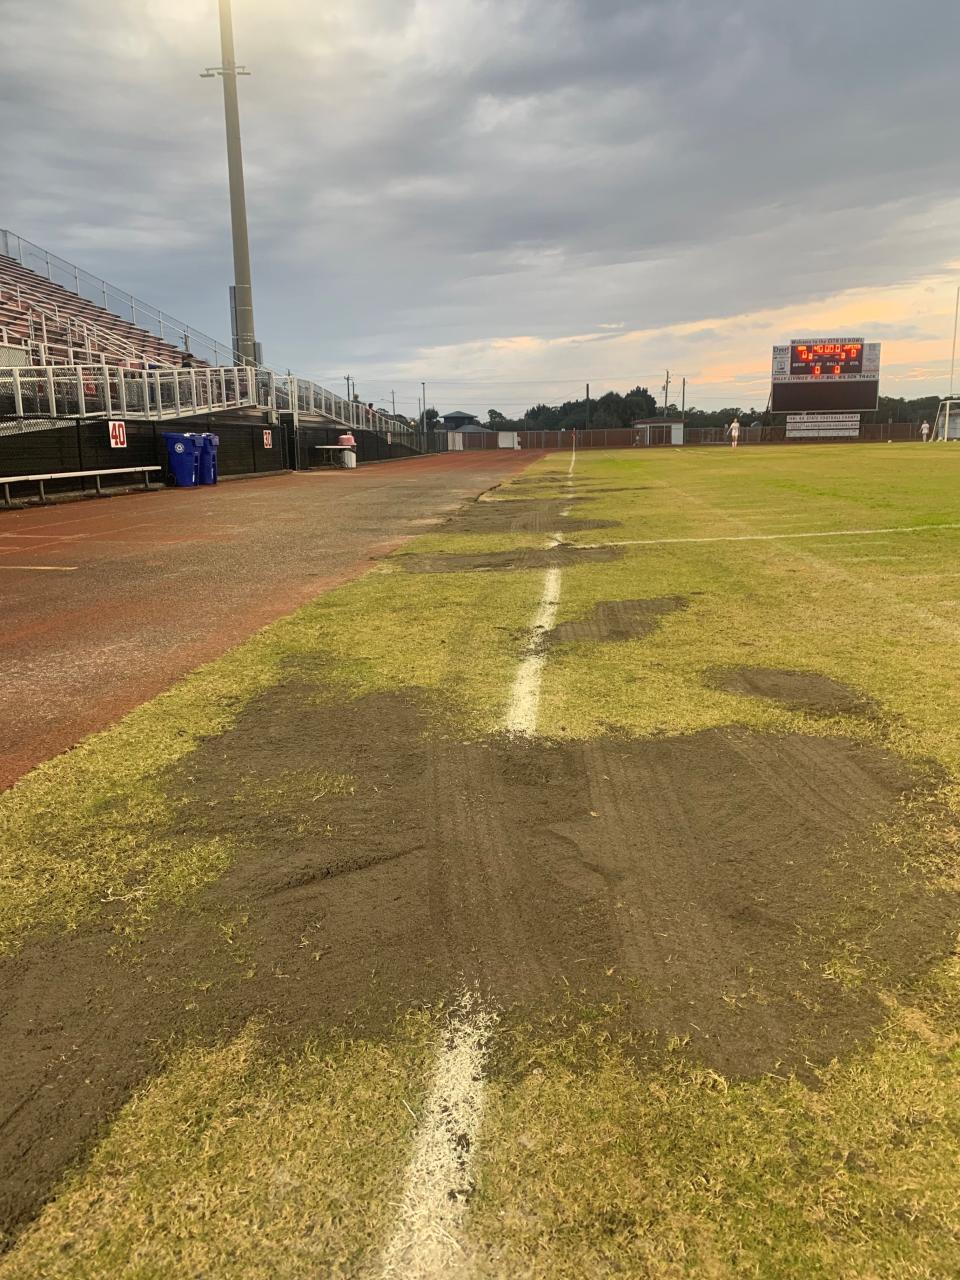 Holes and slopes on the field of the Vero Beach High School Citrus Bowl are shown covered Jan. 21, 2022, before a girls soccer match. The work was done after TCPalm columnist Laurence Reisman asked school officials about dangerous problems found at the field during a girls game Jan. 13, 2022.